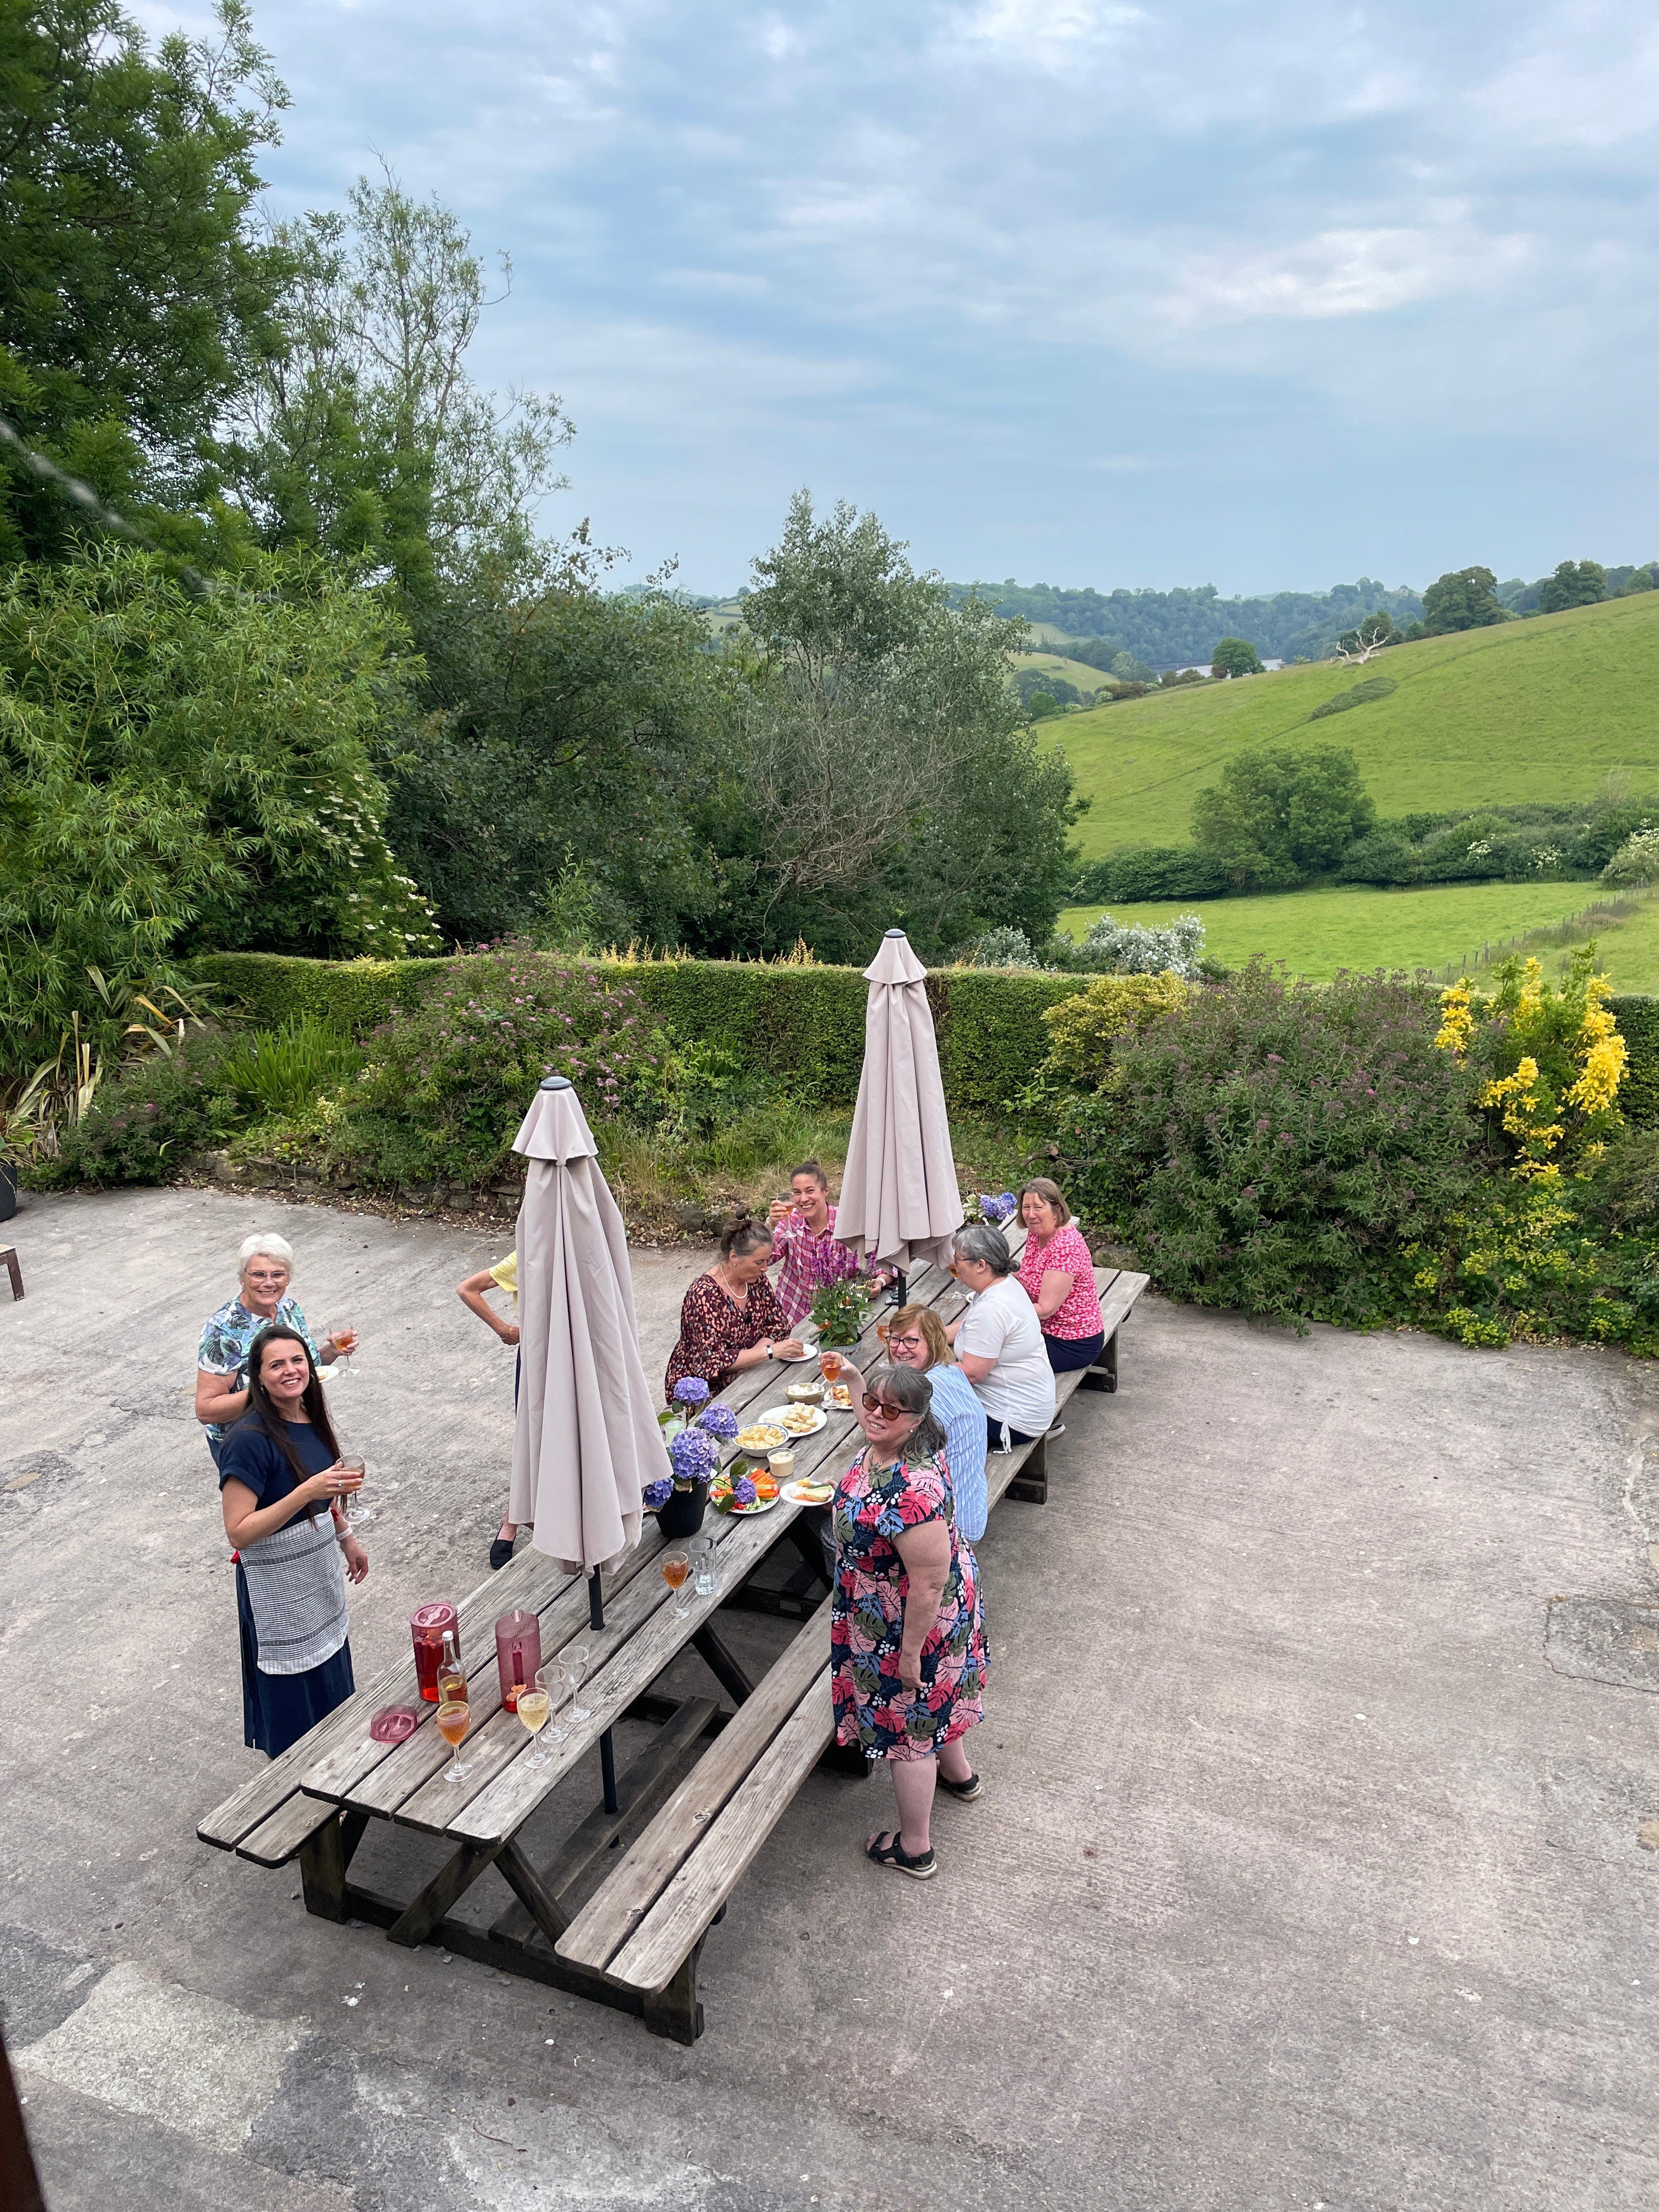 Alfresco lunch at our sewing retreat in Devon